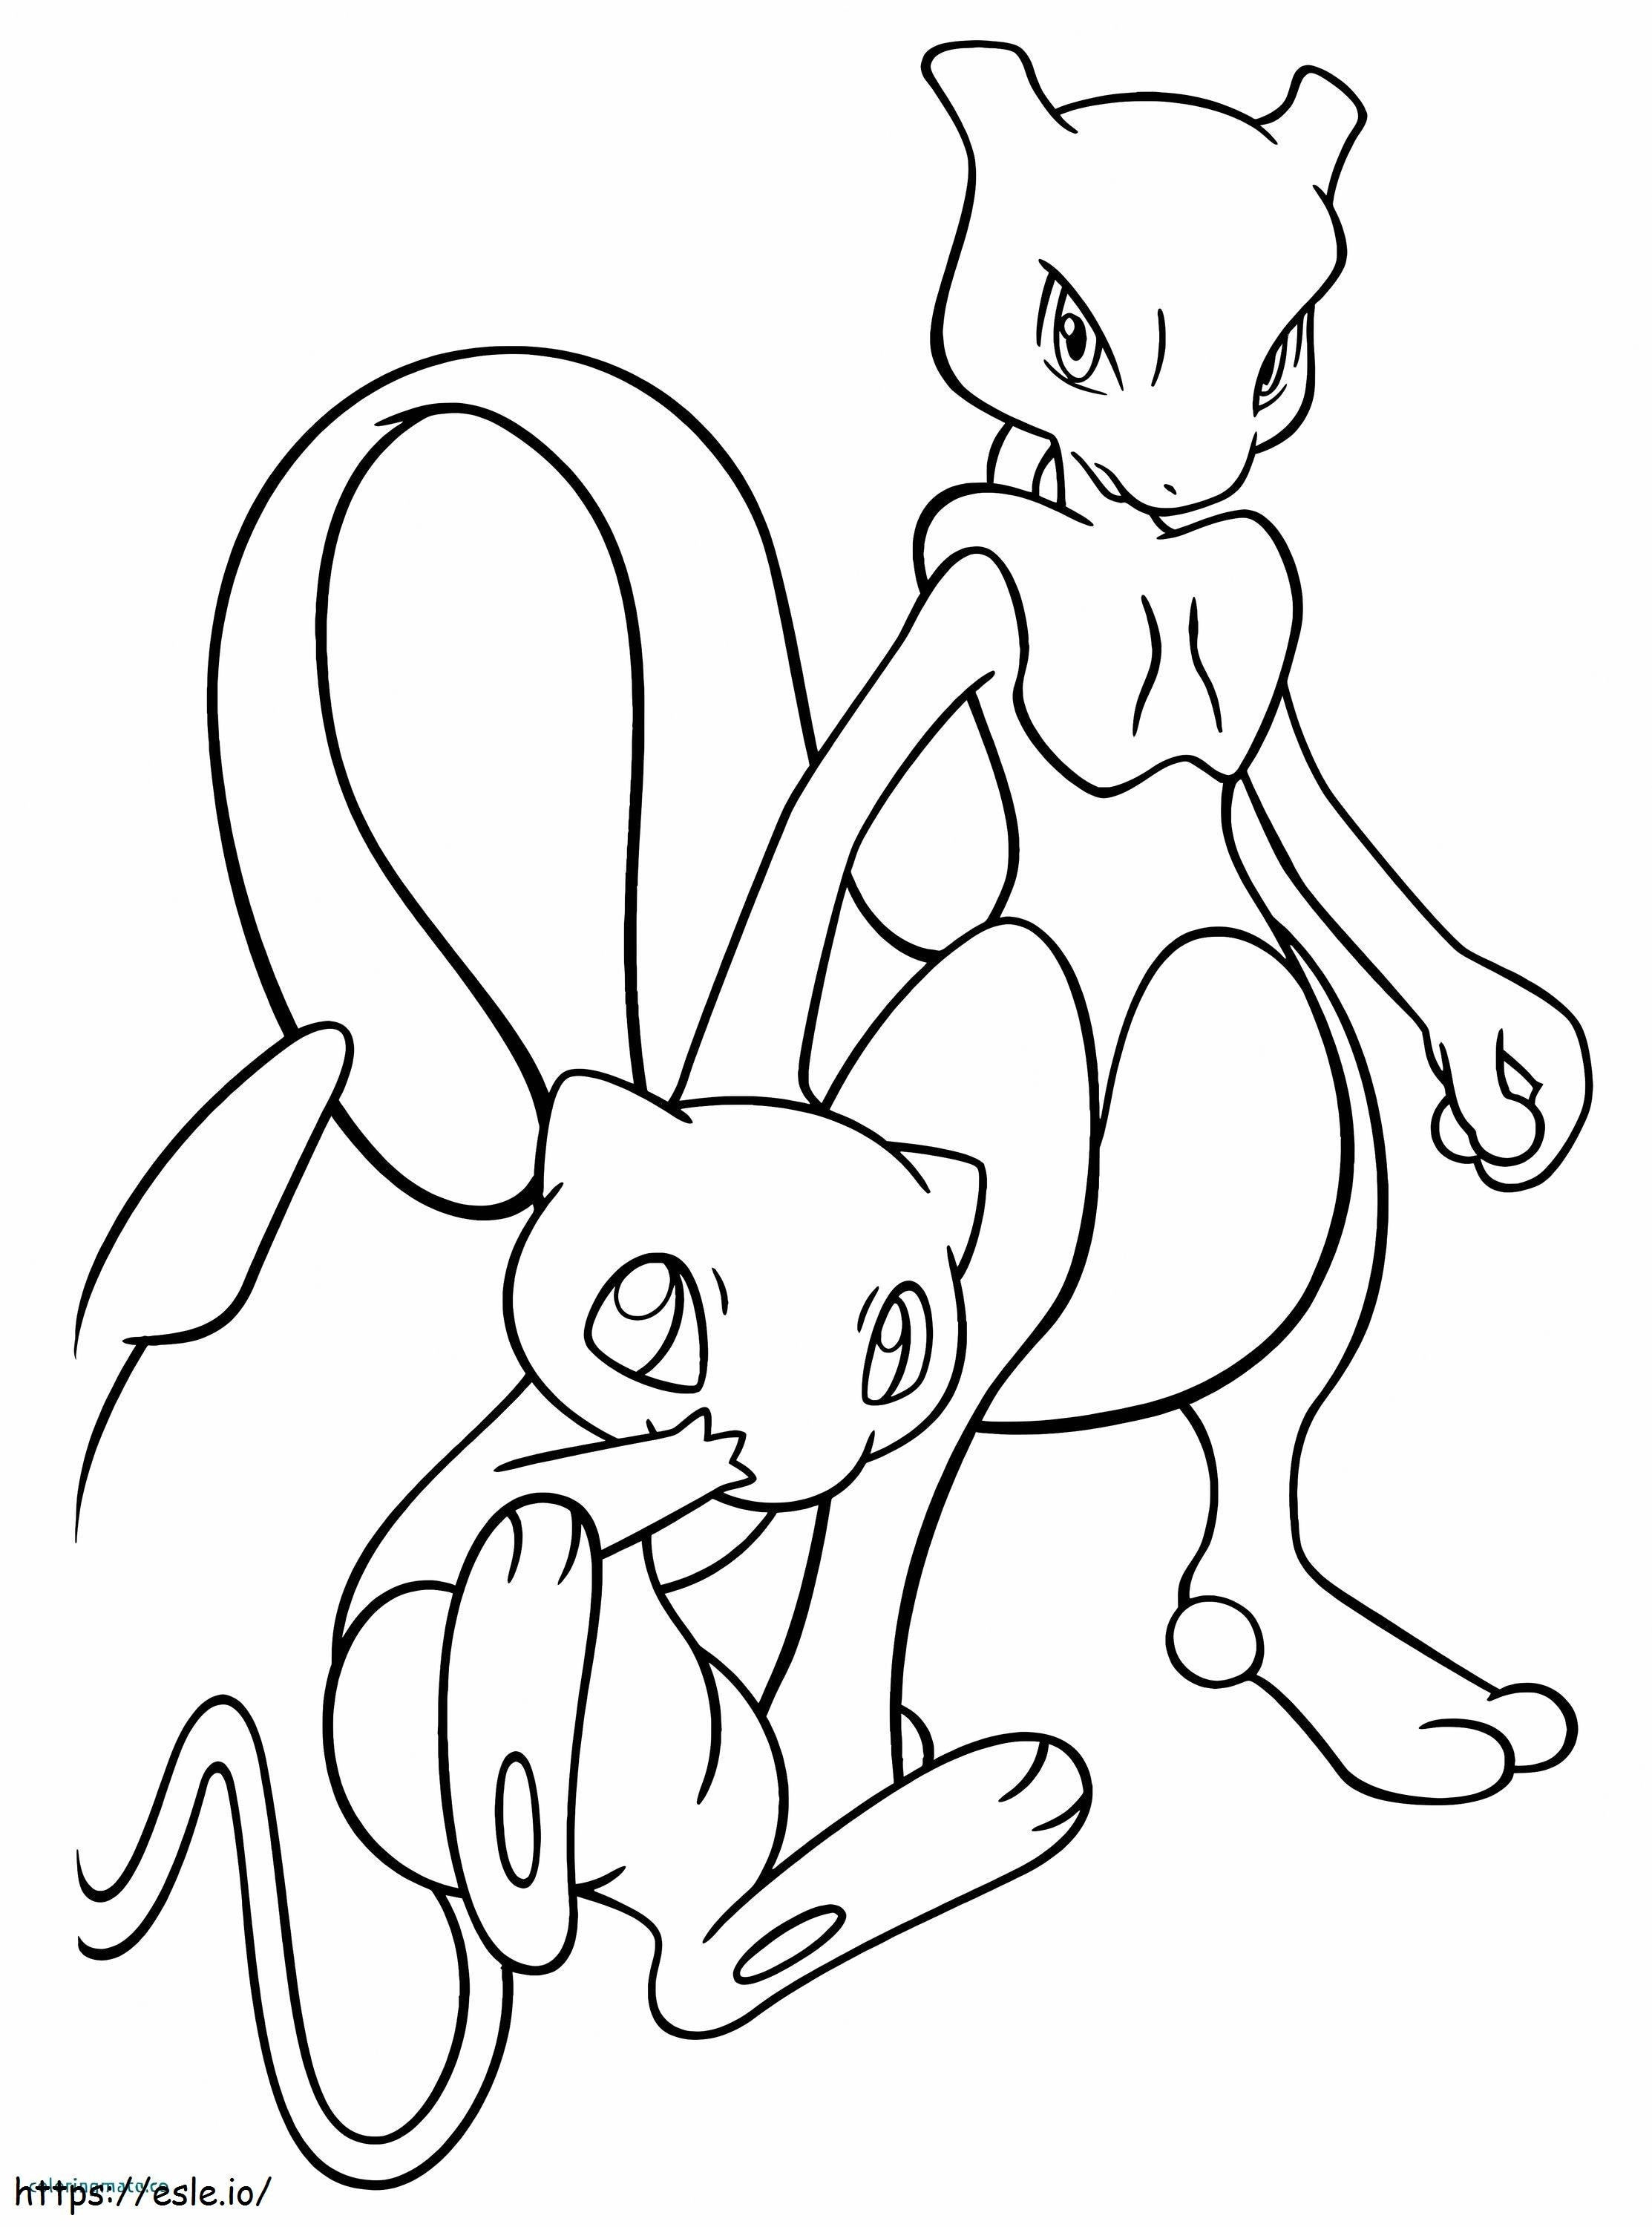 Mewtwo 2 coloring page